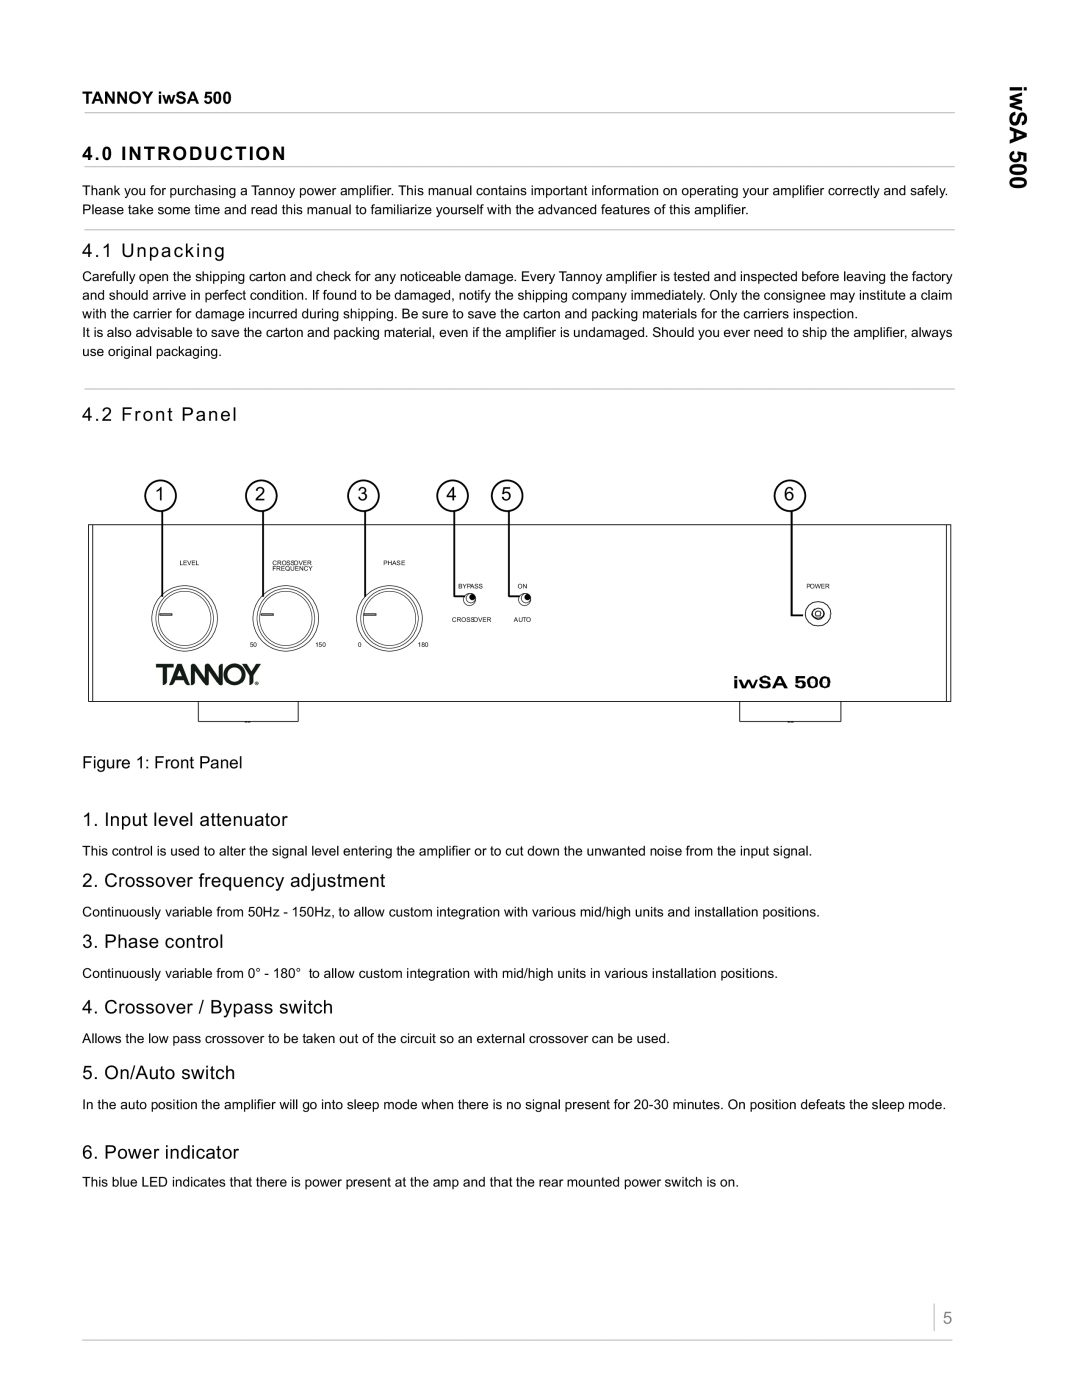 Tannoy iwSA 500 owner manual Introduction 